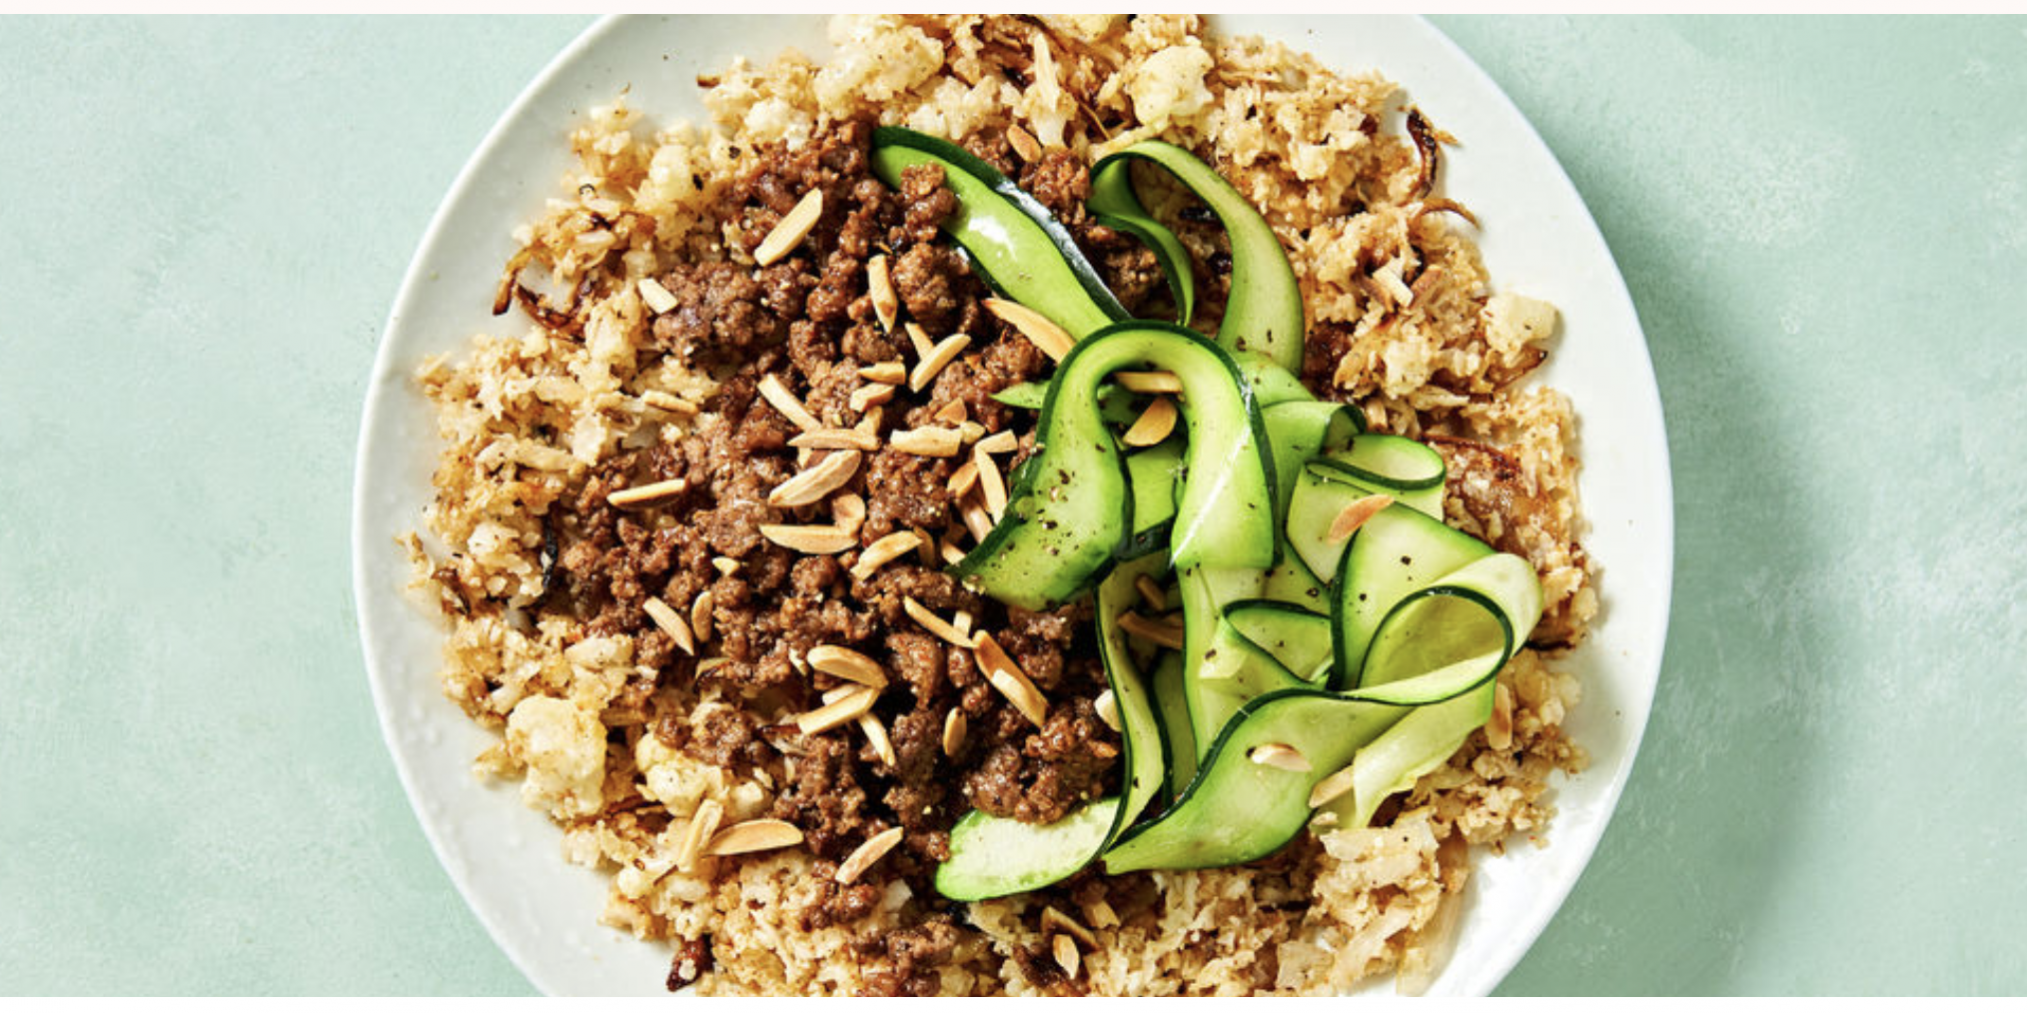 Reduced-Carb Middle Eastern Lamb with Cauliflower 'Rice' and Almonds